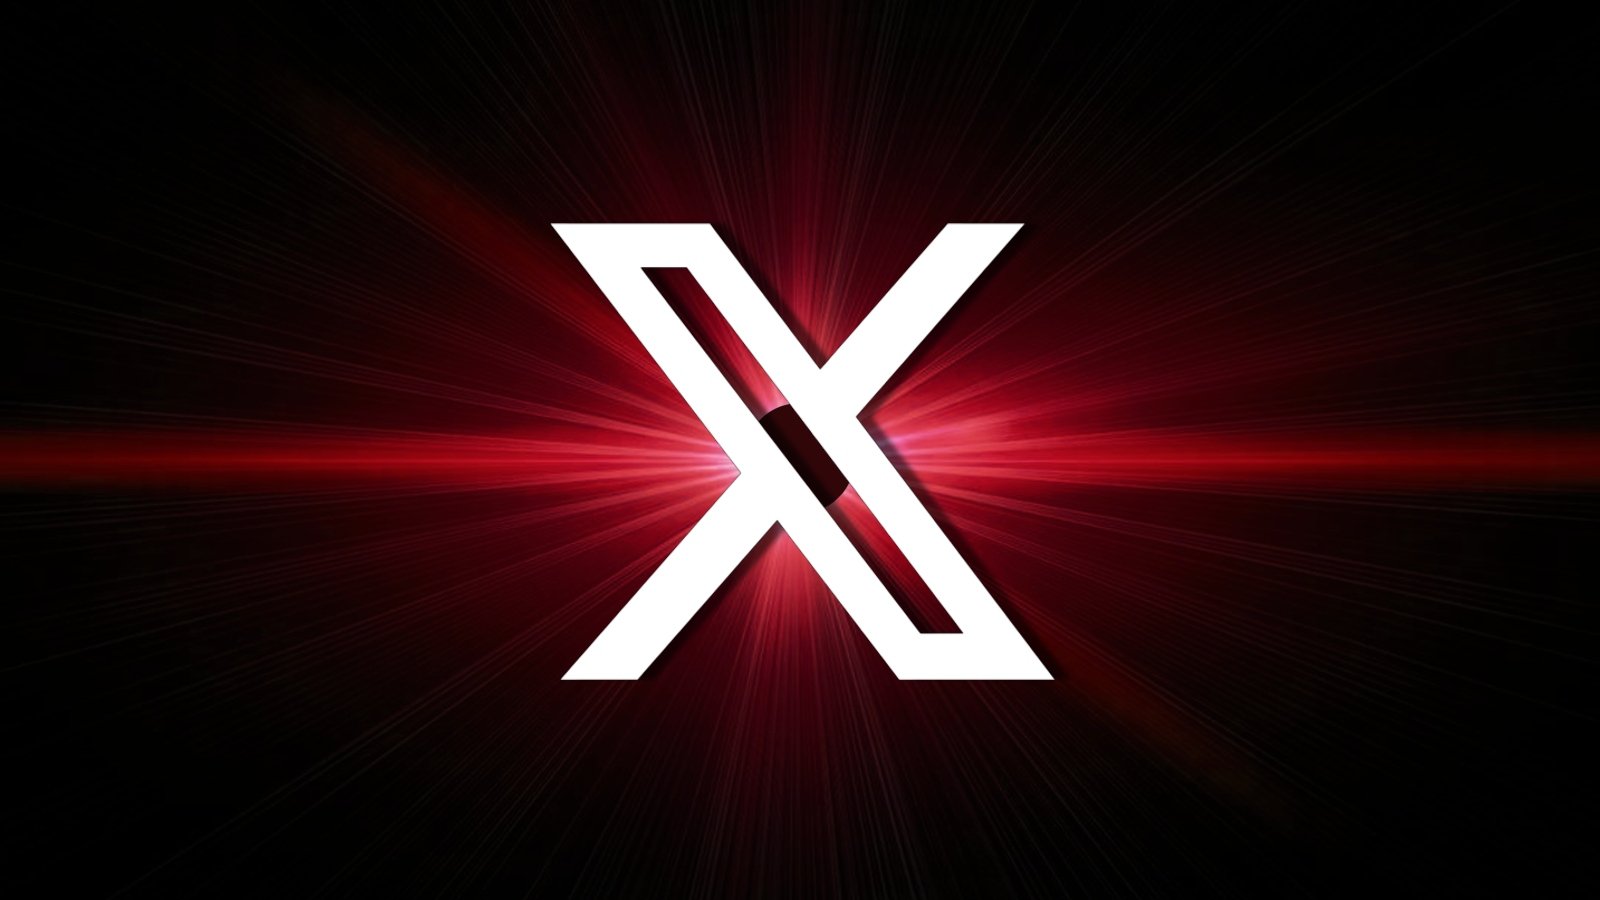 X logo on a flare background